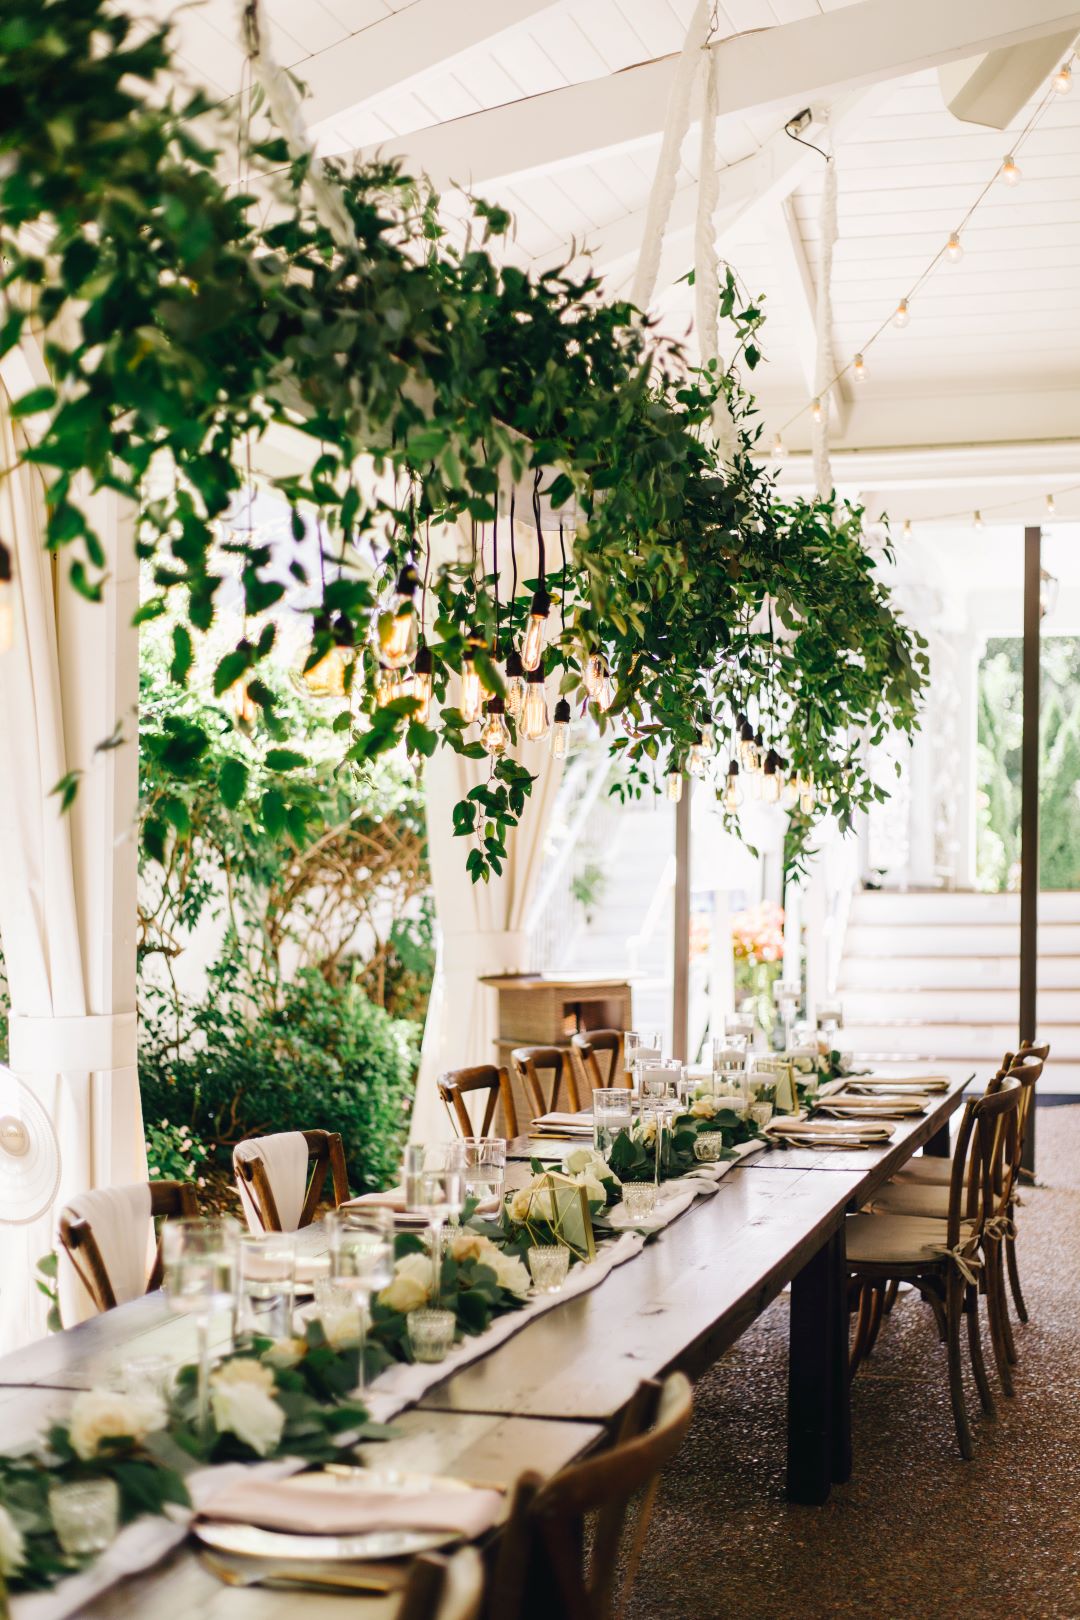 Long wedding party table with greenery hanging in chandeliers at earthy summer garden wedding in September, neutrals & greenery